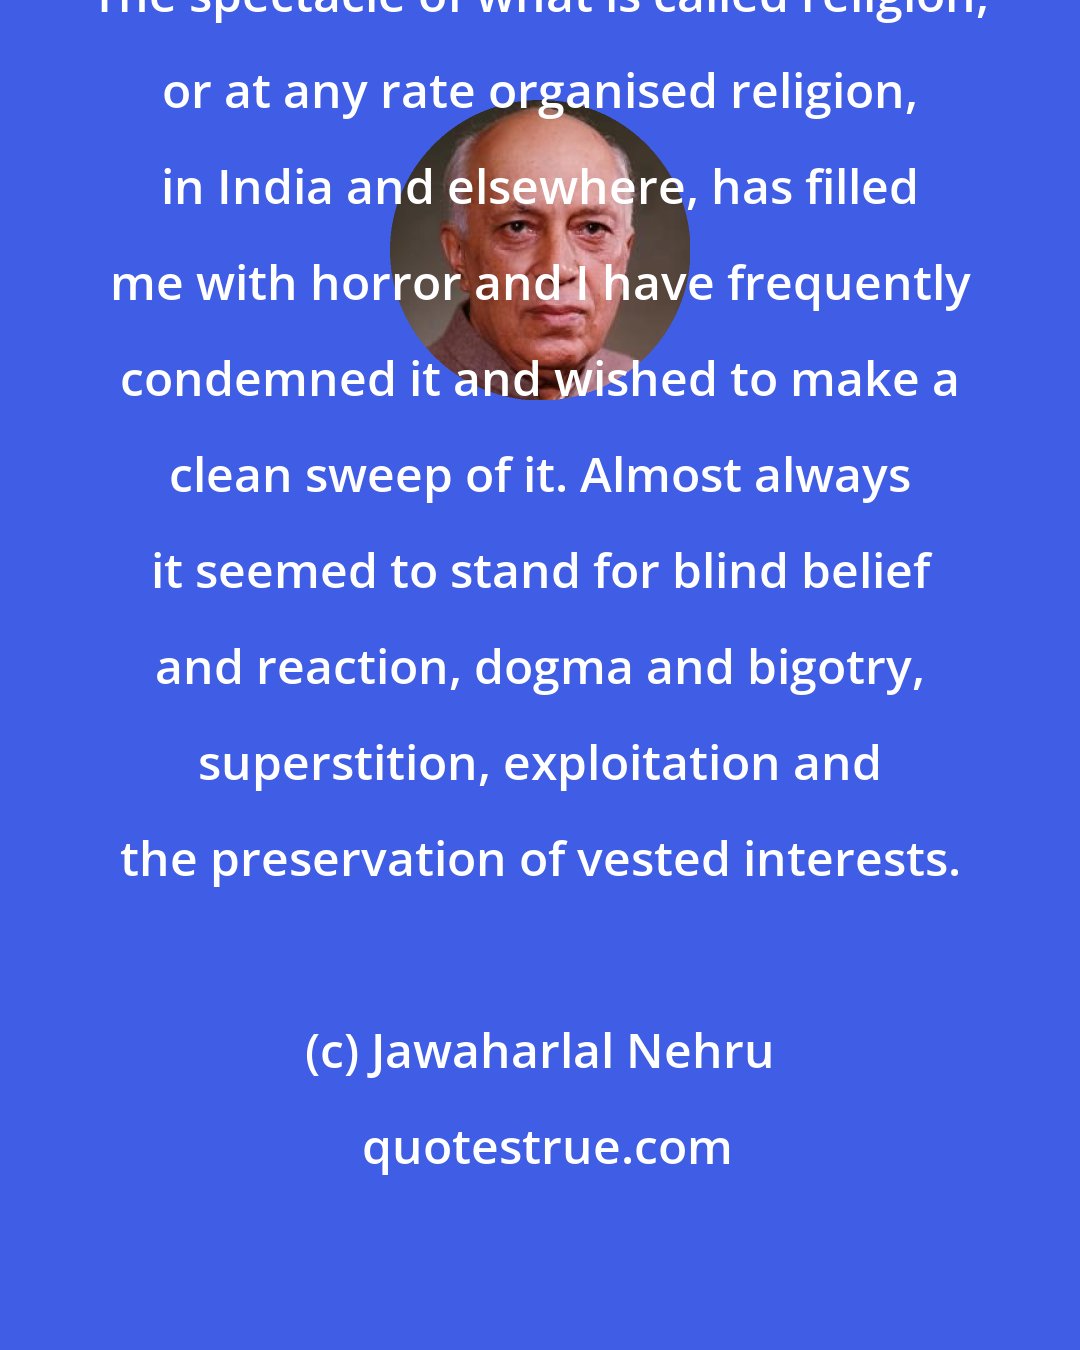 Jawaharlal Nehru: The spectacle of what is called religion, or at any rate organised religion, in India and elsewhere, has filled me with horror and I have frequently condemned it and wished to make a clean sweep of it. Almost always it seemed to stand for blind belief and reaction, dogma and bigotry, superstition, exploitation and the preservation of vested interests.